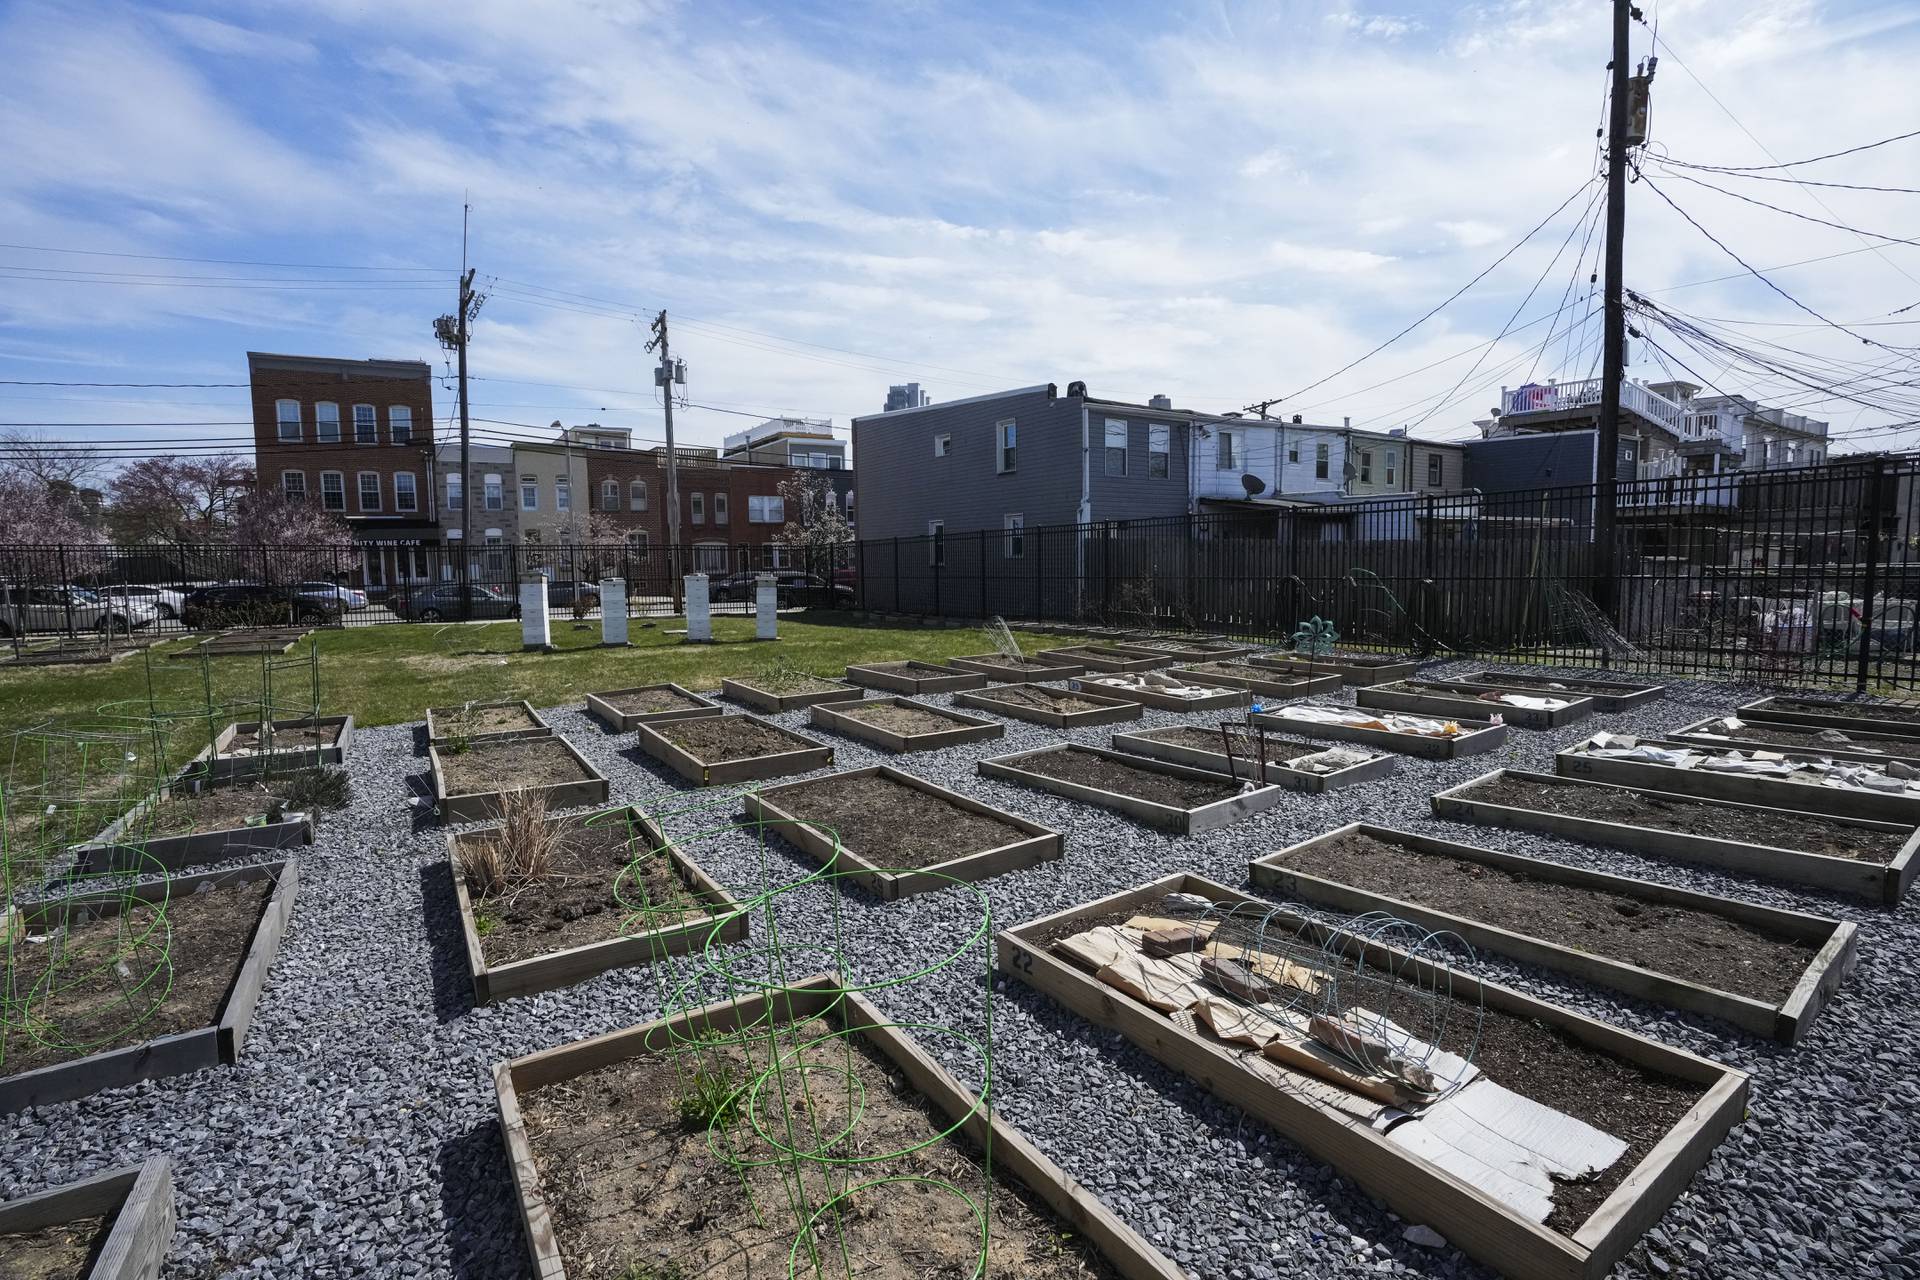 Scenes of the community garden located next to Under Armour in Locust Point.